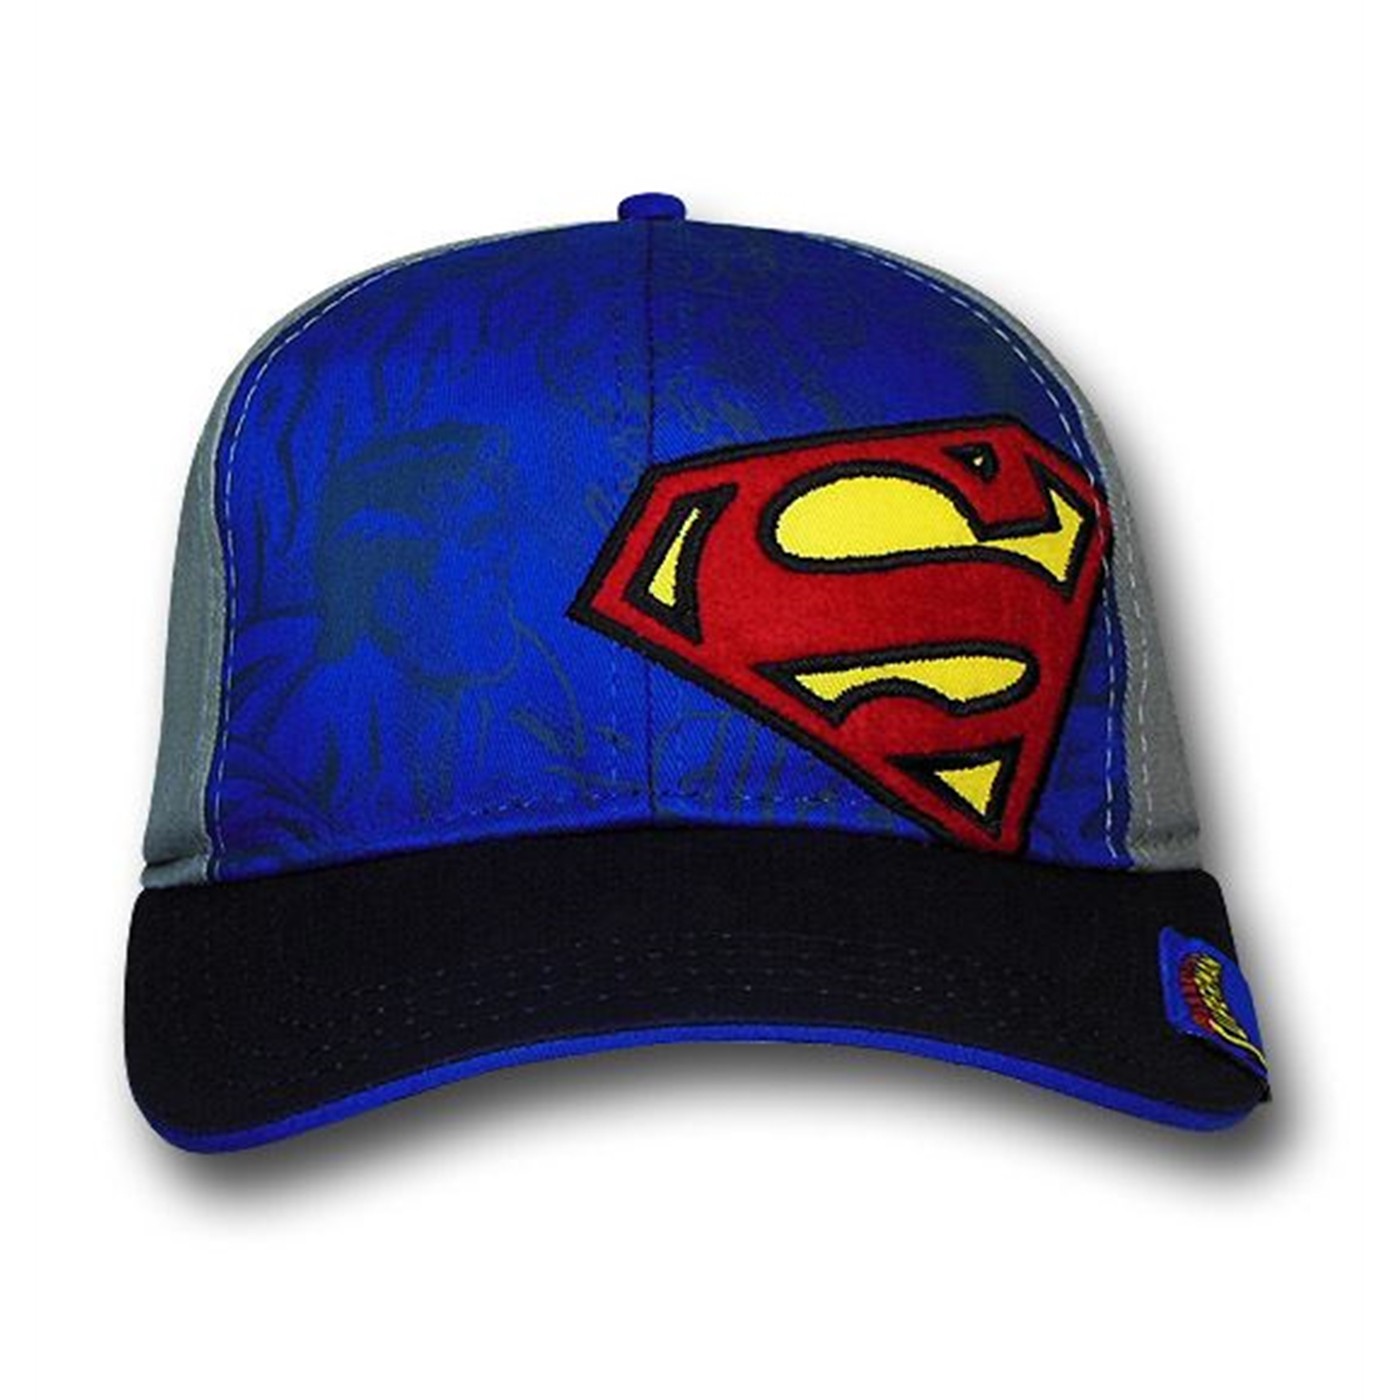 Superman Sublimated Action and Symbol Adjustable Youth Cap